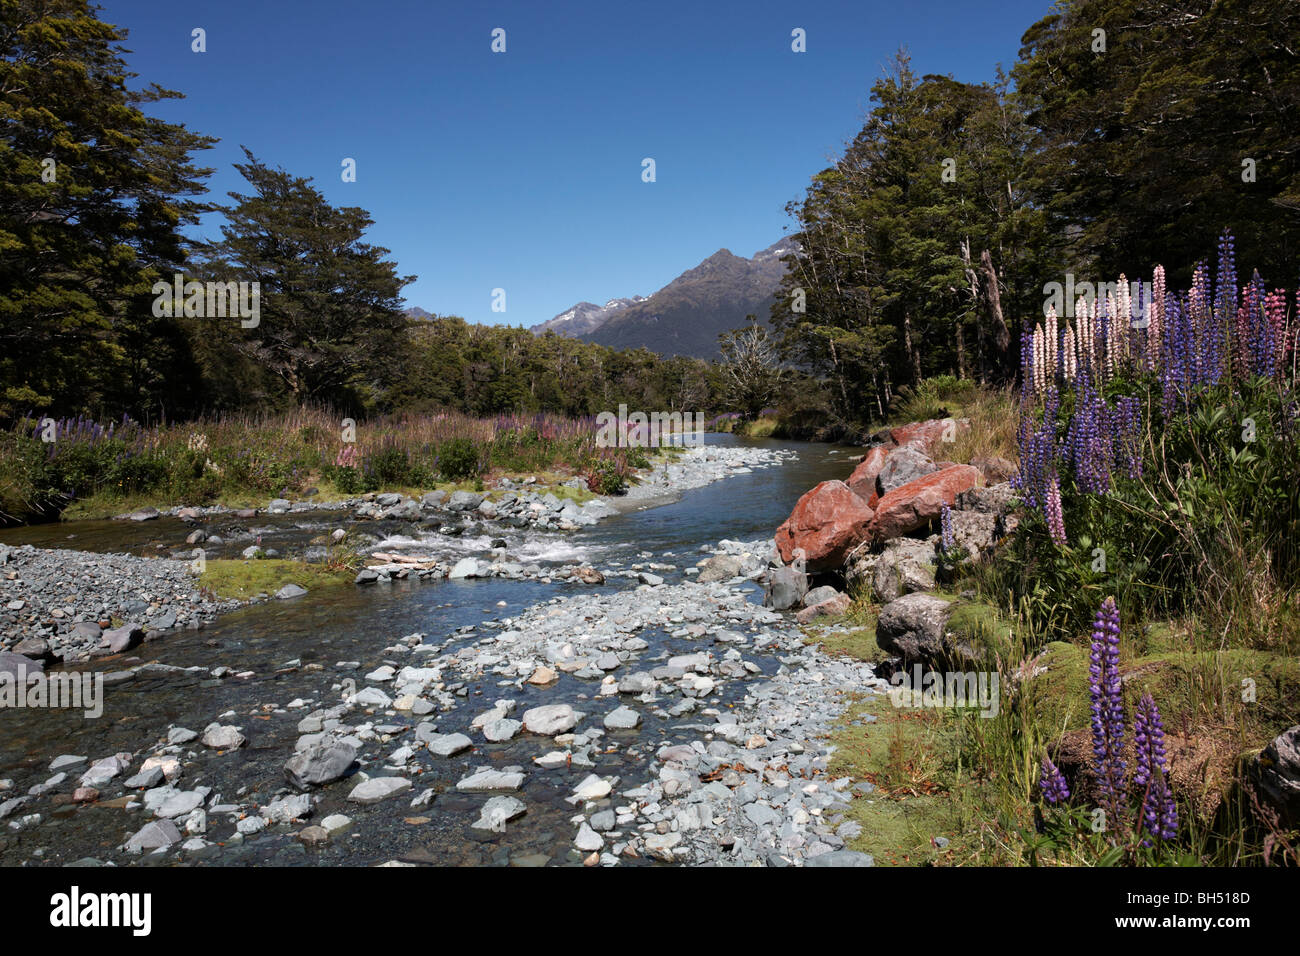 Stunning scenery of lupins, stream and snow capped mountains in the background at Cascade Creek, South Island in January. Stock Photo